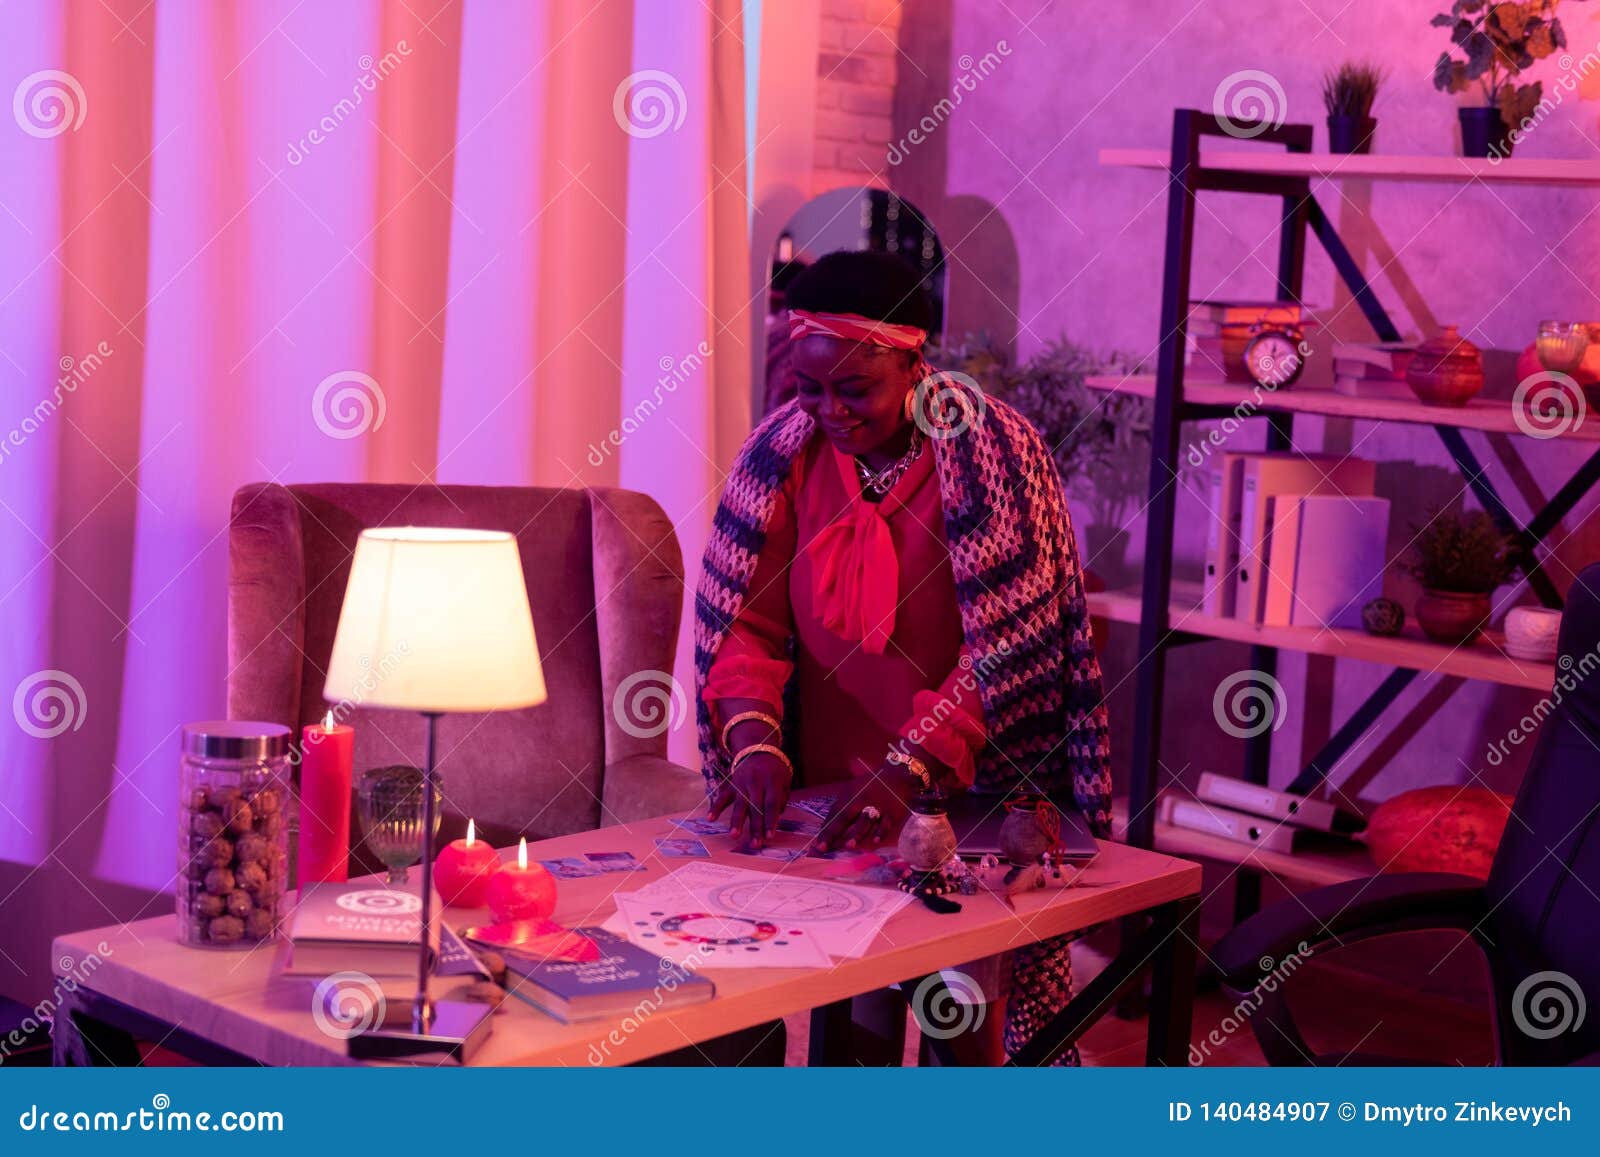 African American Plump Fortune-teller With Huge Earrings Standing Near The Table With Divination ...